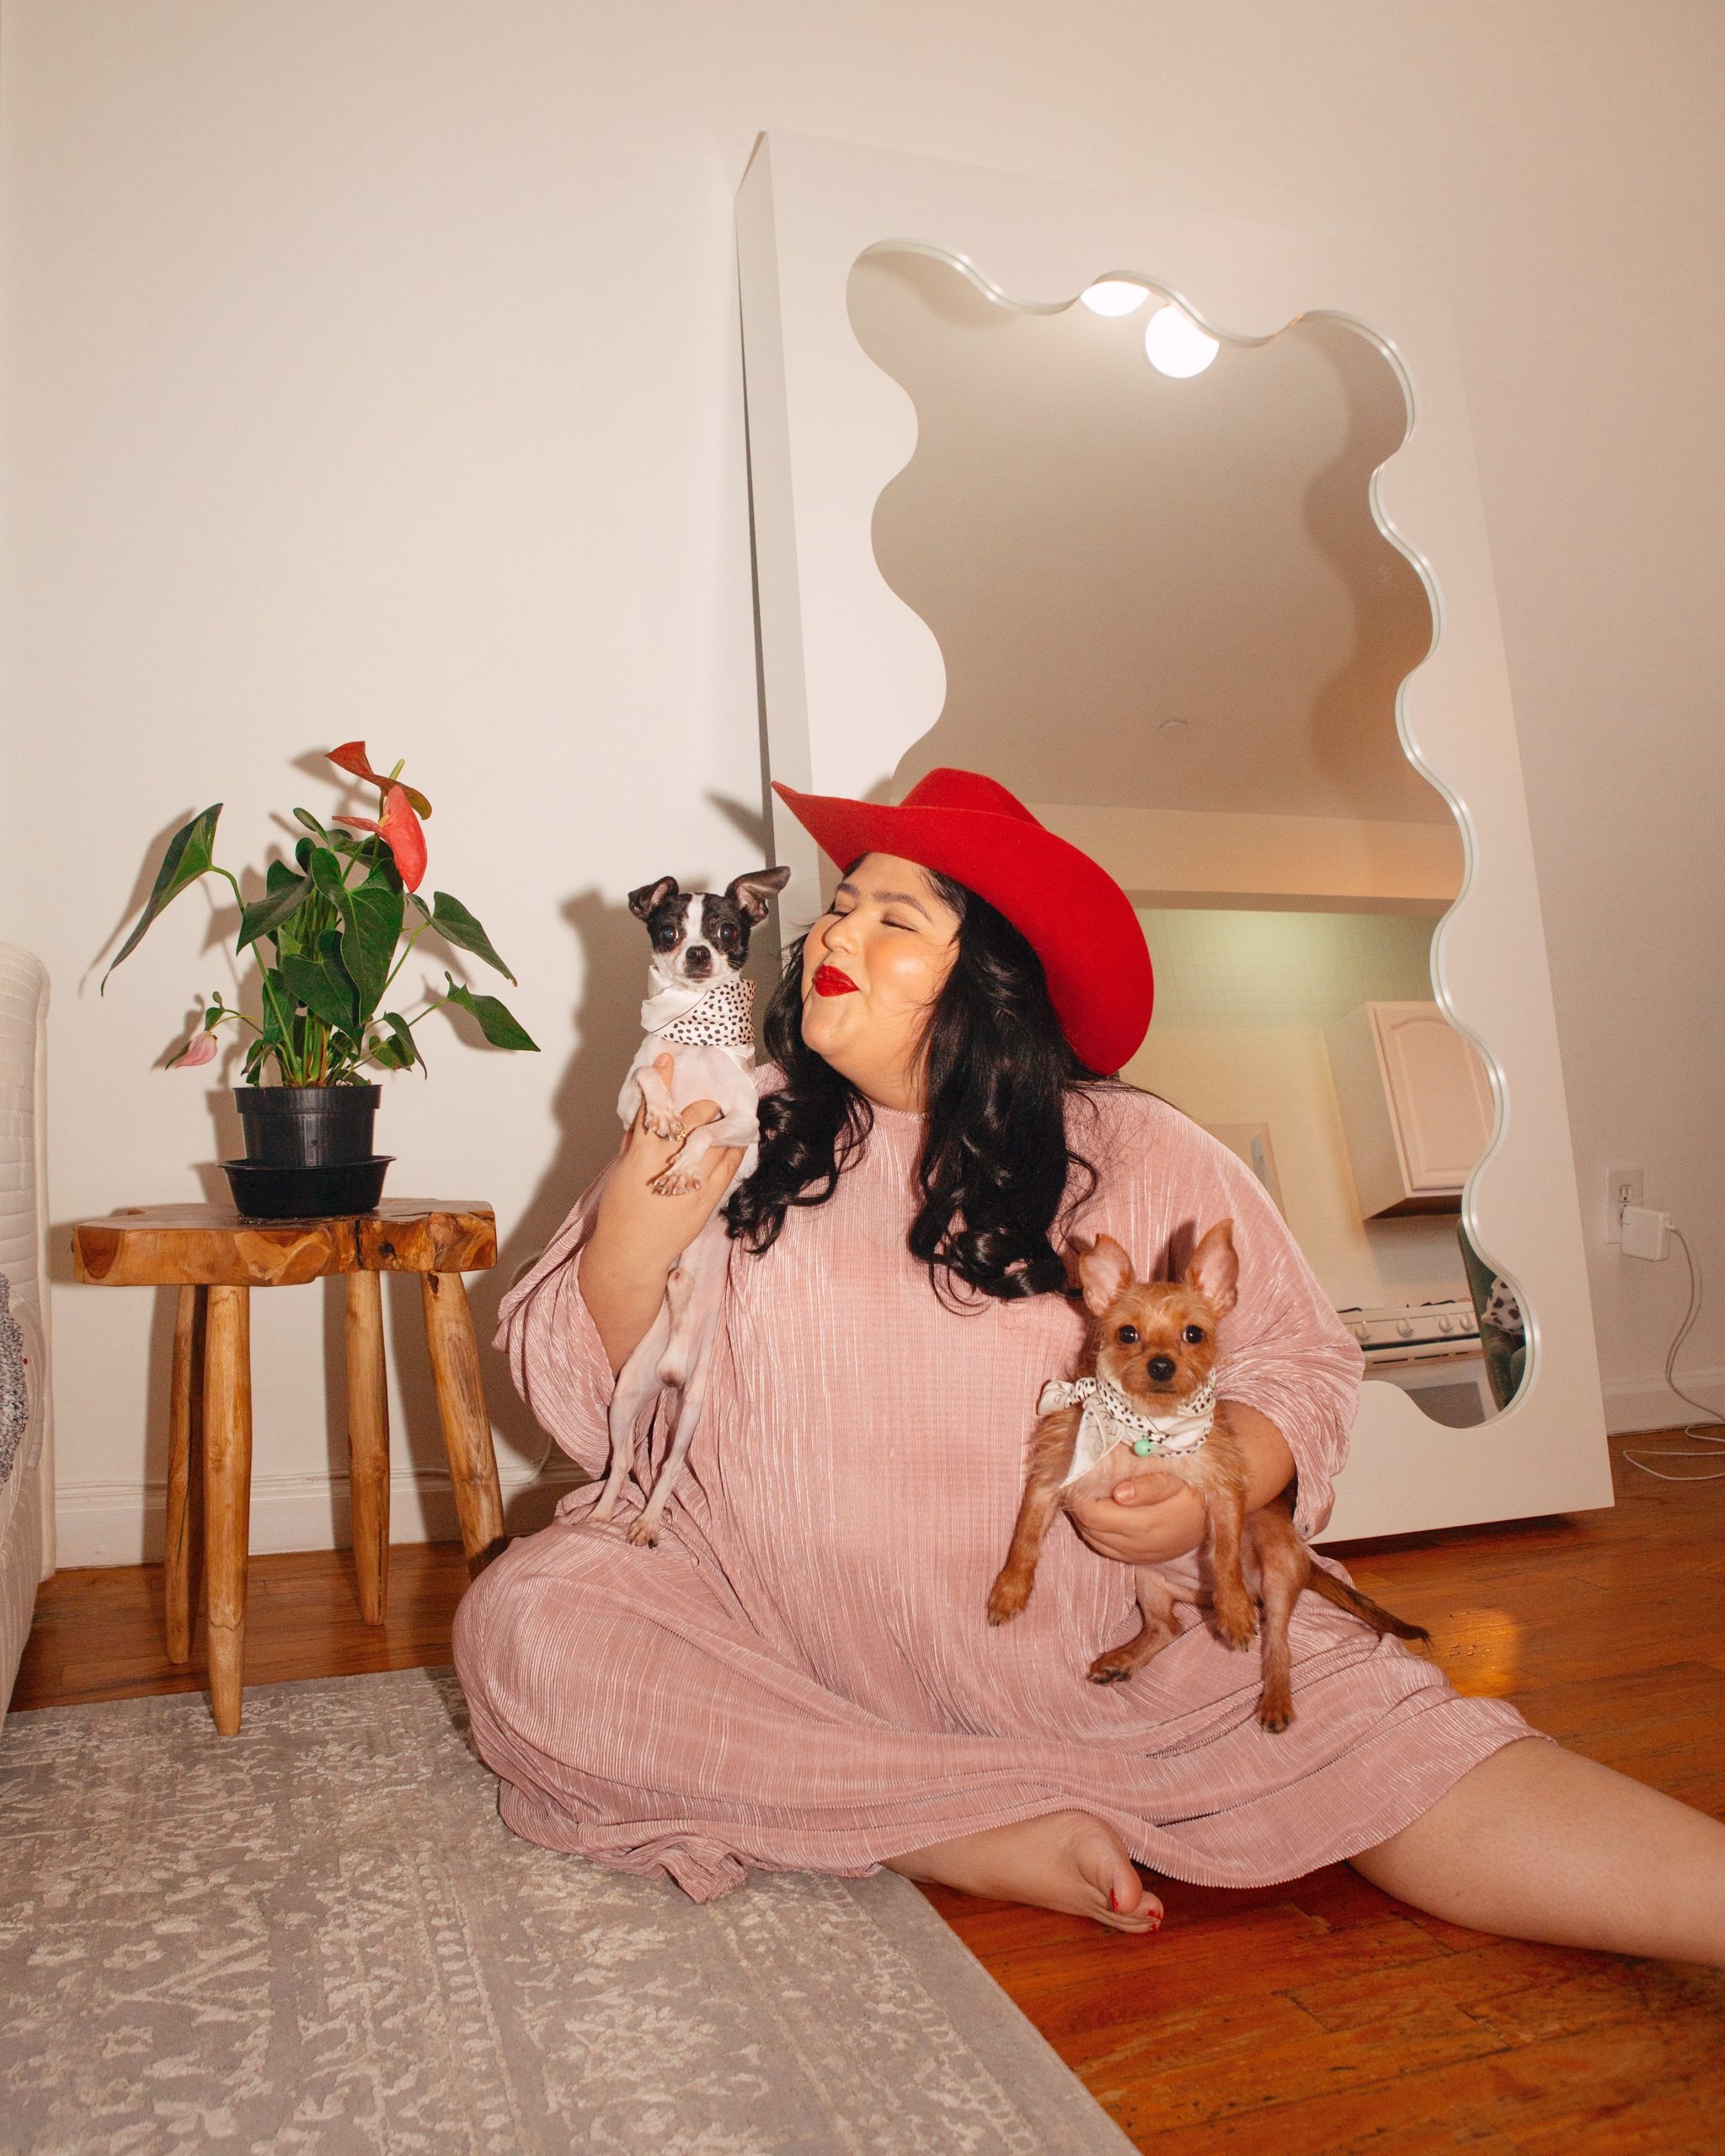 Creator Jessica Torres with her dogs, Martina and Manolo.